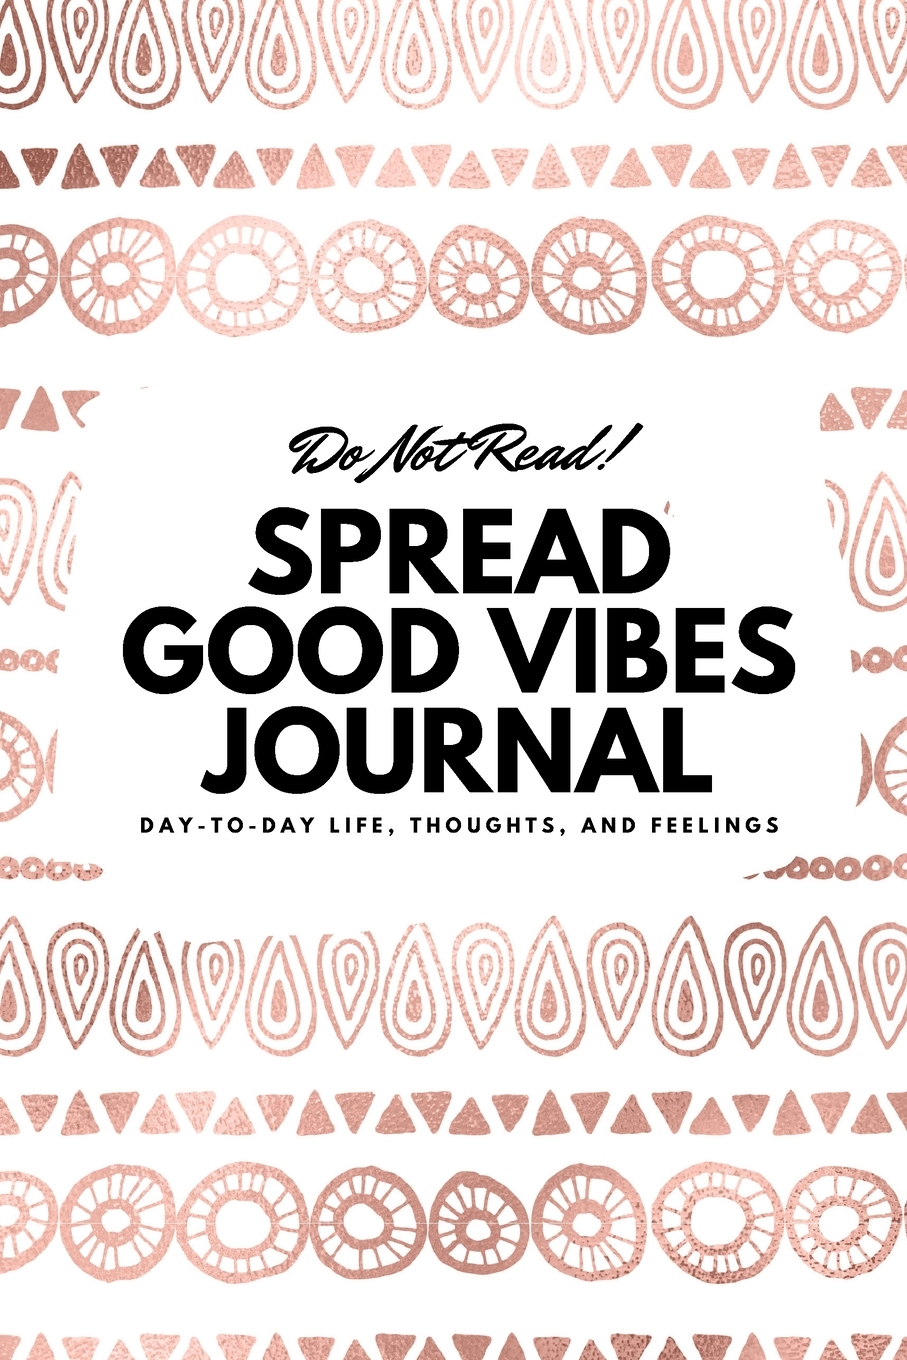 6x9 Blank Journal: Do Not Read! Spread Good Vibes Journal - Small Blank Journal - 6x9 Blank Journal (Softcover Journal / Notebook / Sketchbook / Diary) (Series #11) (Paperback) - image 1 of 1